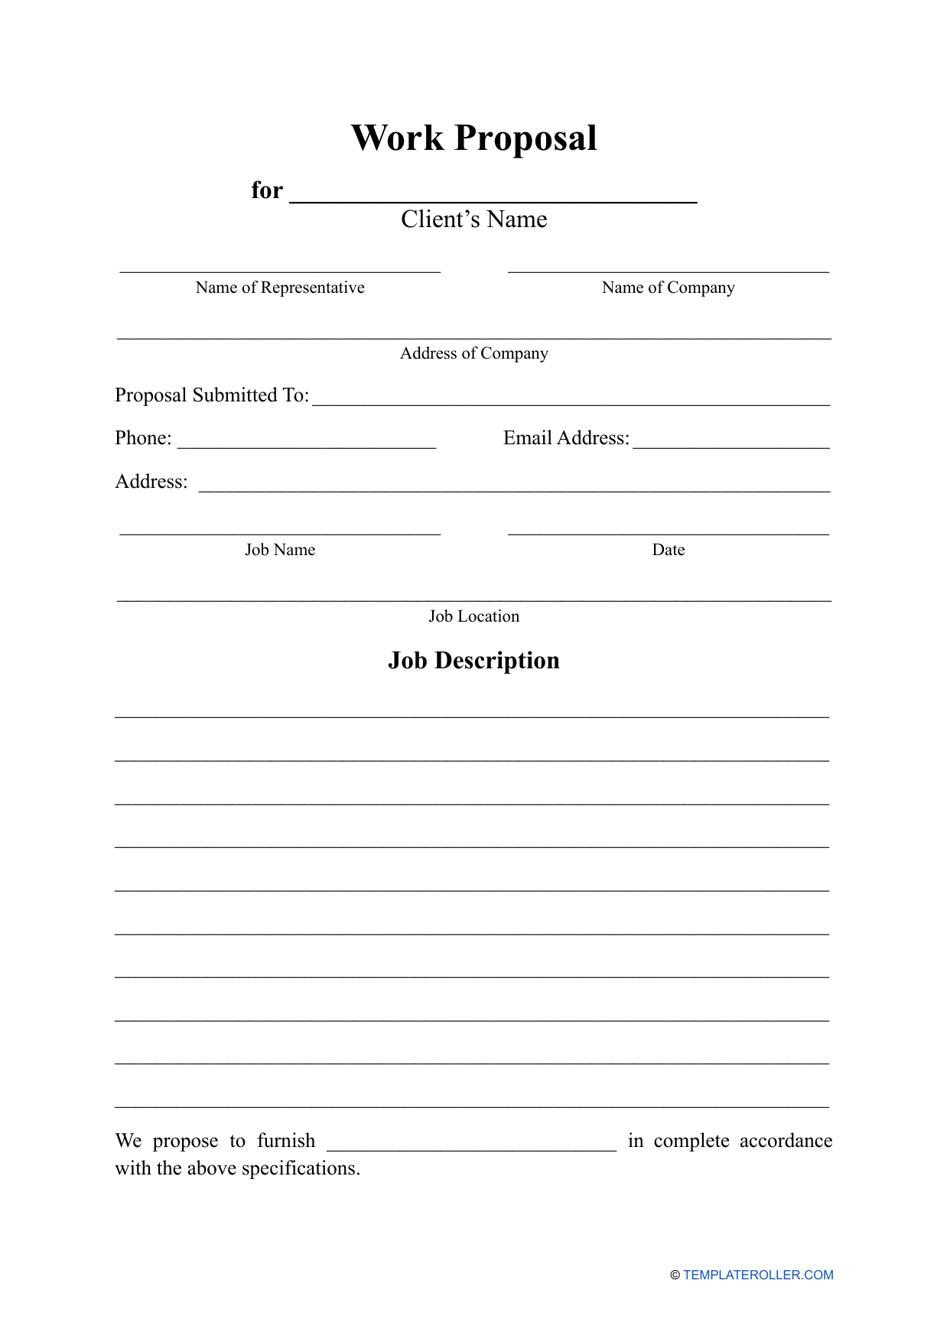 Work Proposal Template Preview